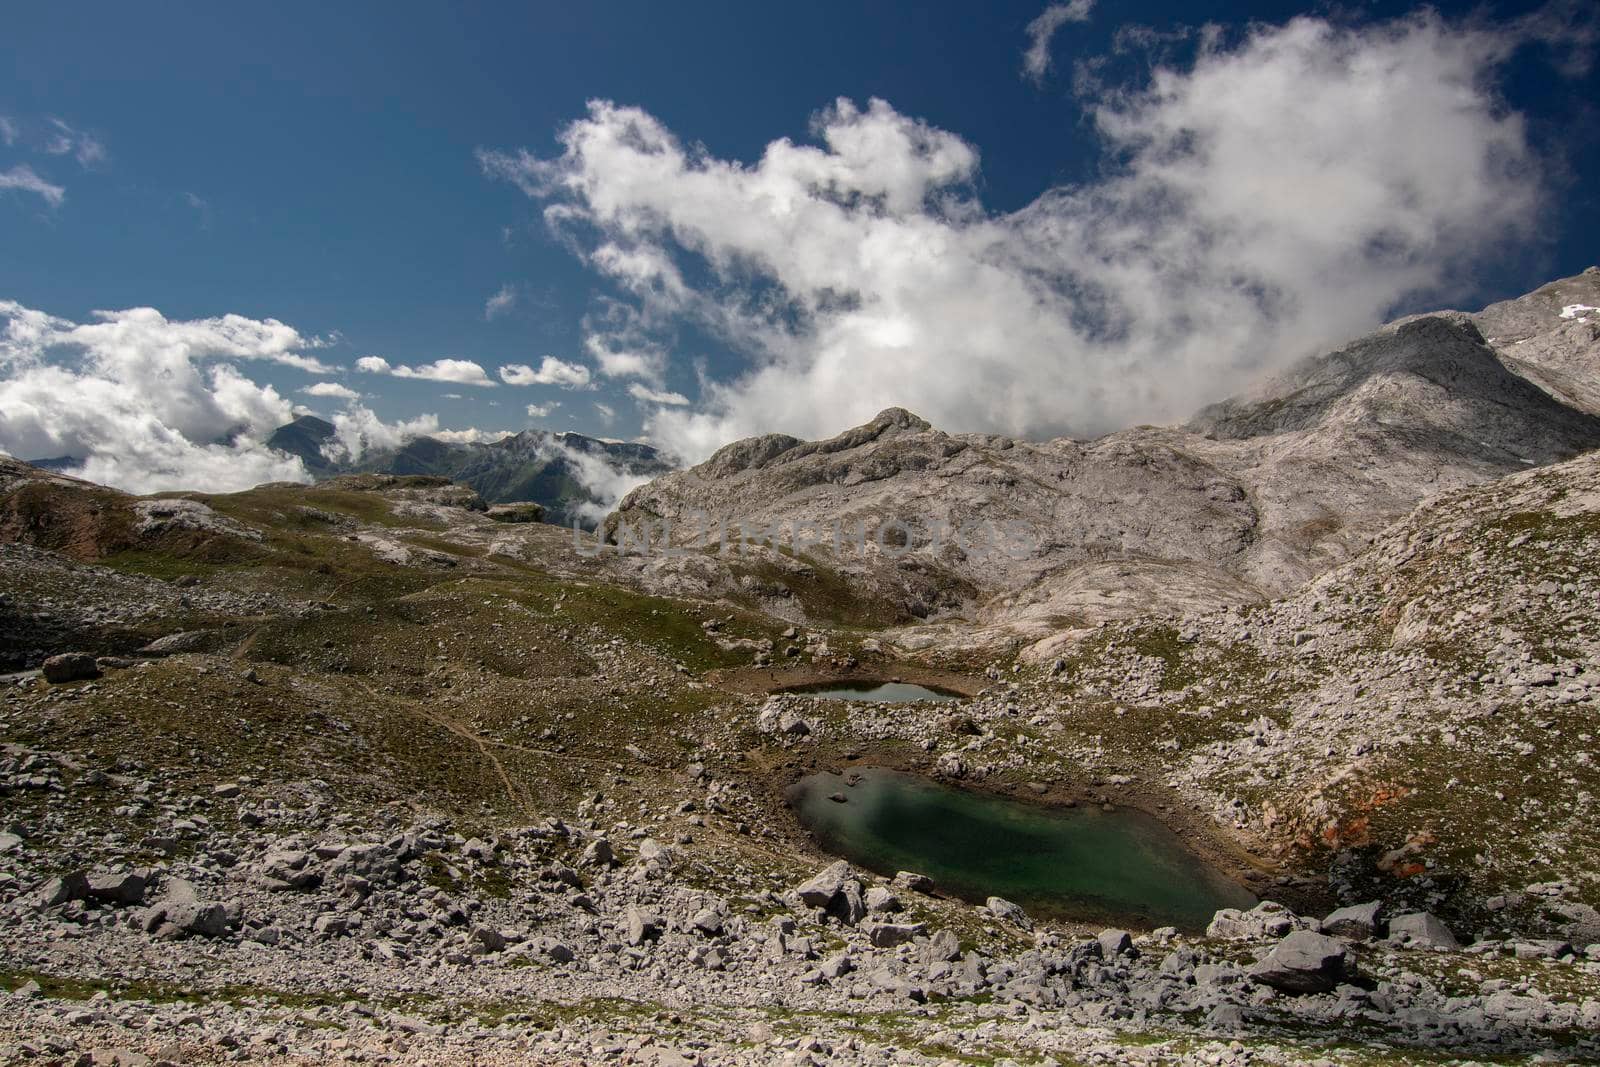 Landscape showing high mountain and a lake in Fuente Dé, a place in Picos de Europa National Park in Spain